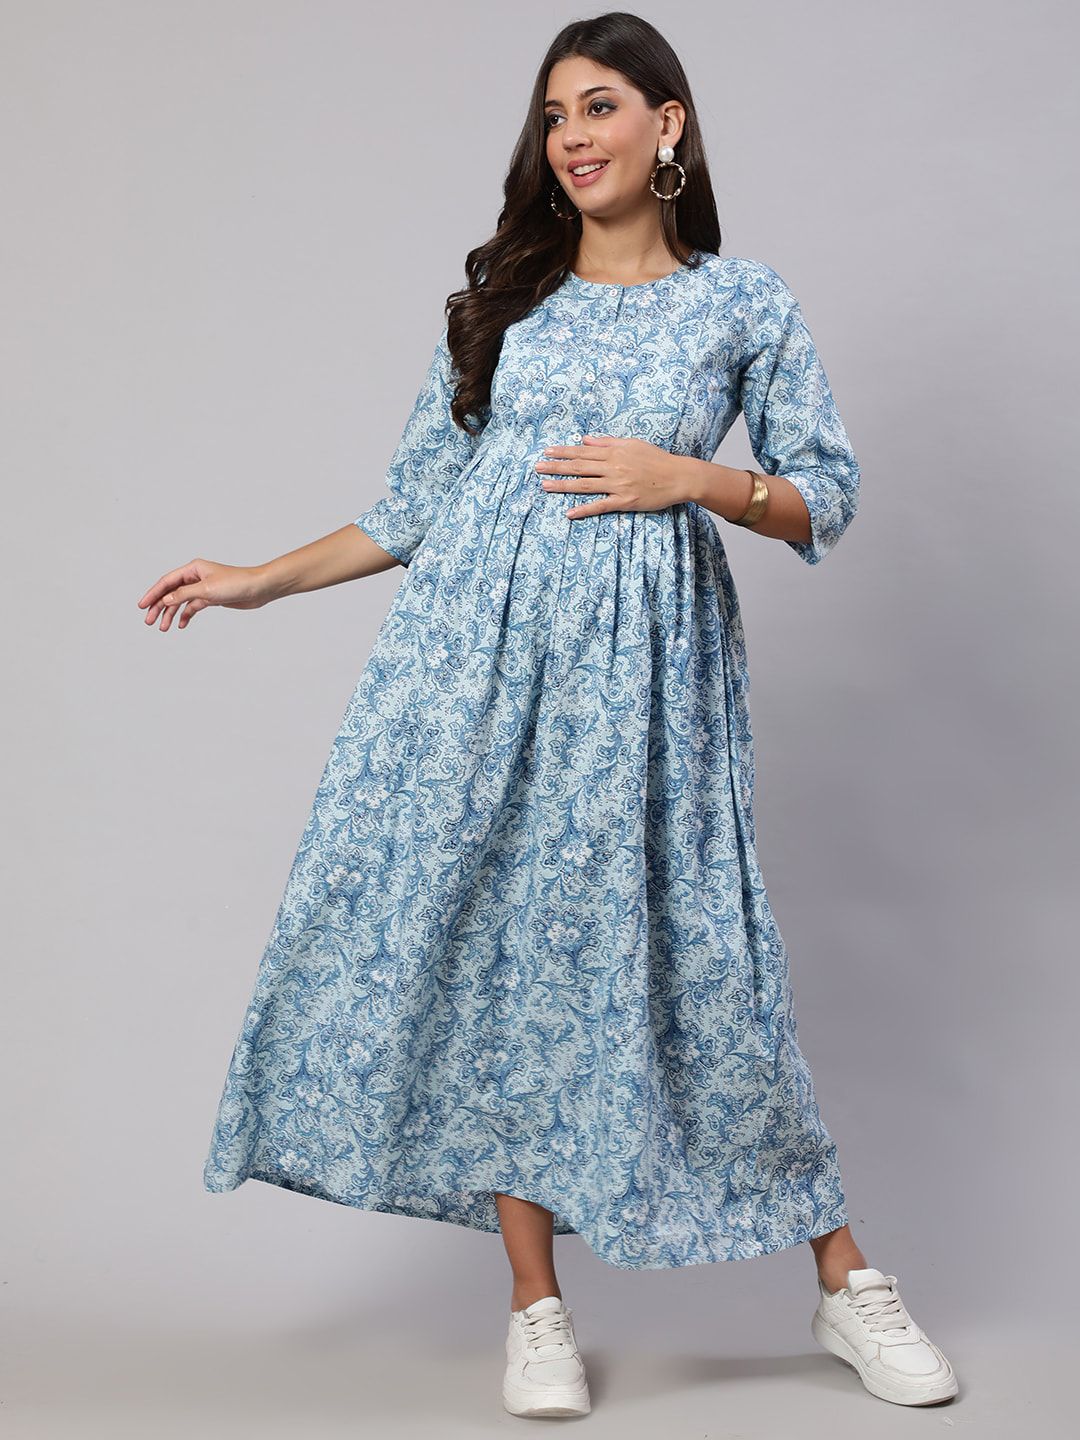 Nayo Floral Printed Gathered Maternity Fit & Flare Dress Price in India